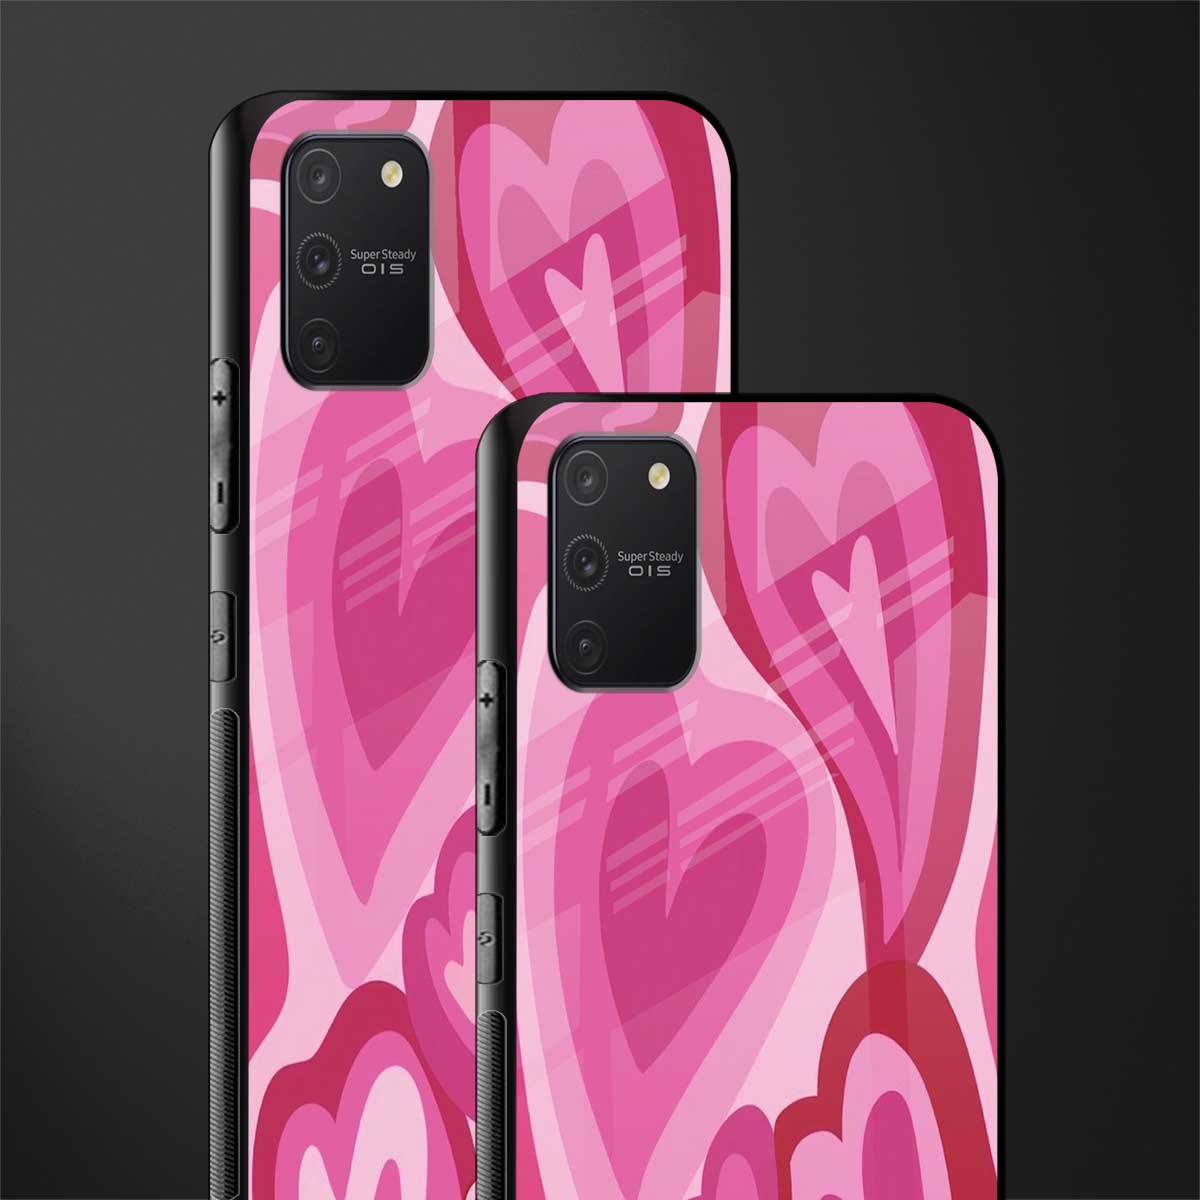 y2k pink hearts glass case for samsung galaxy s10 lite image-2